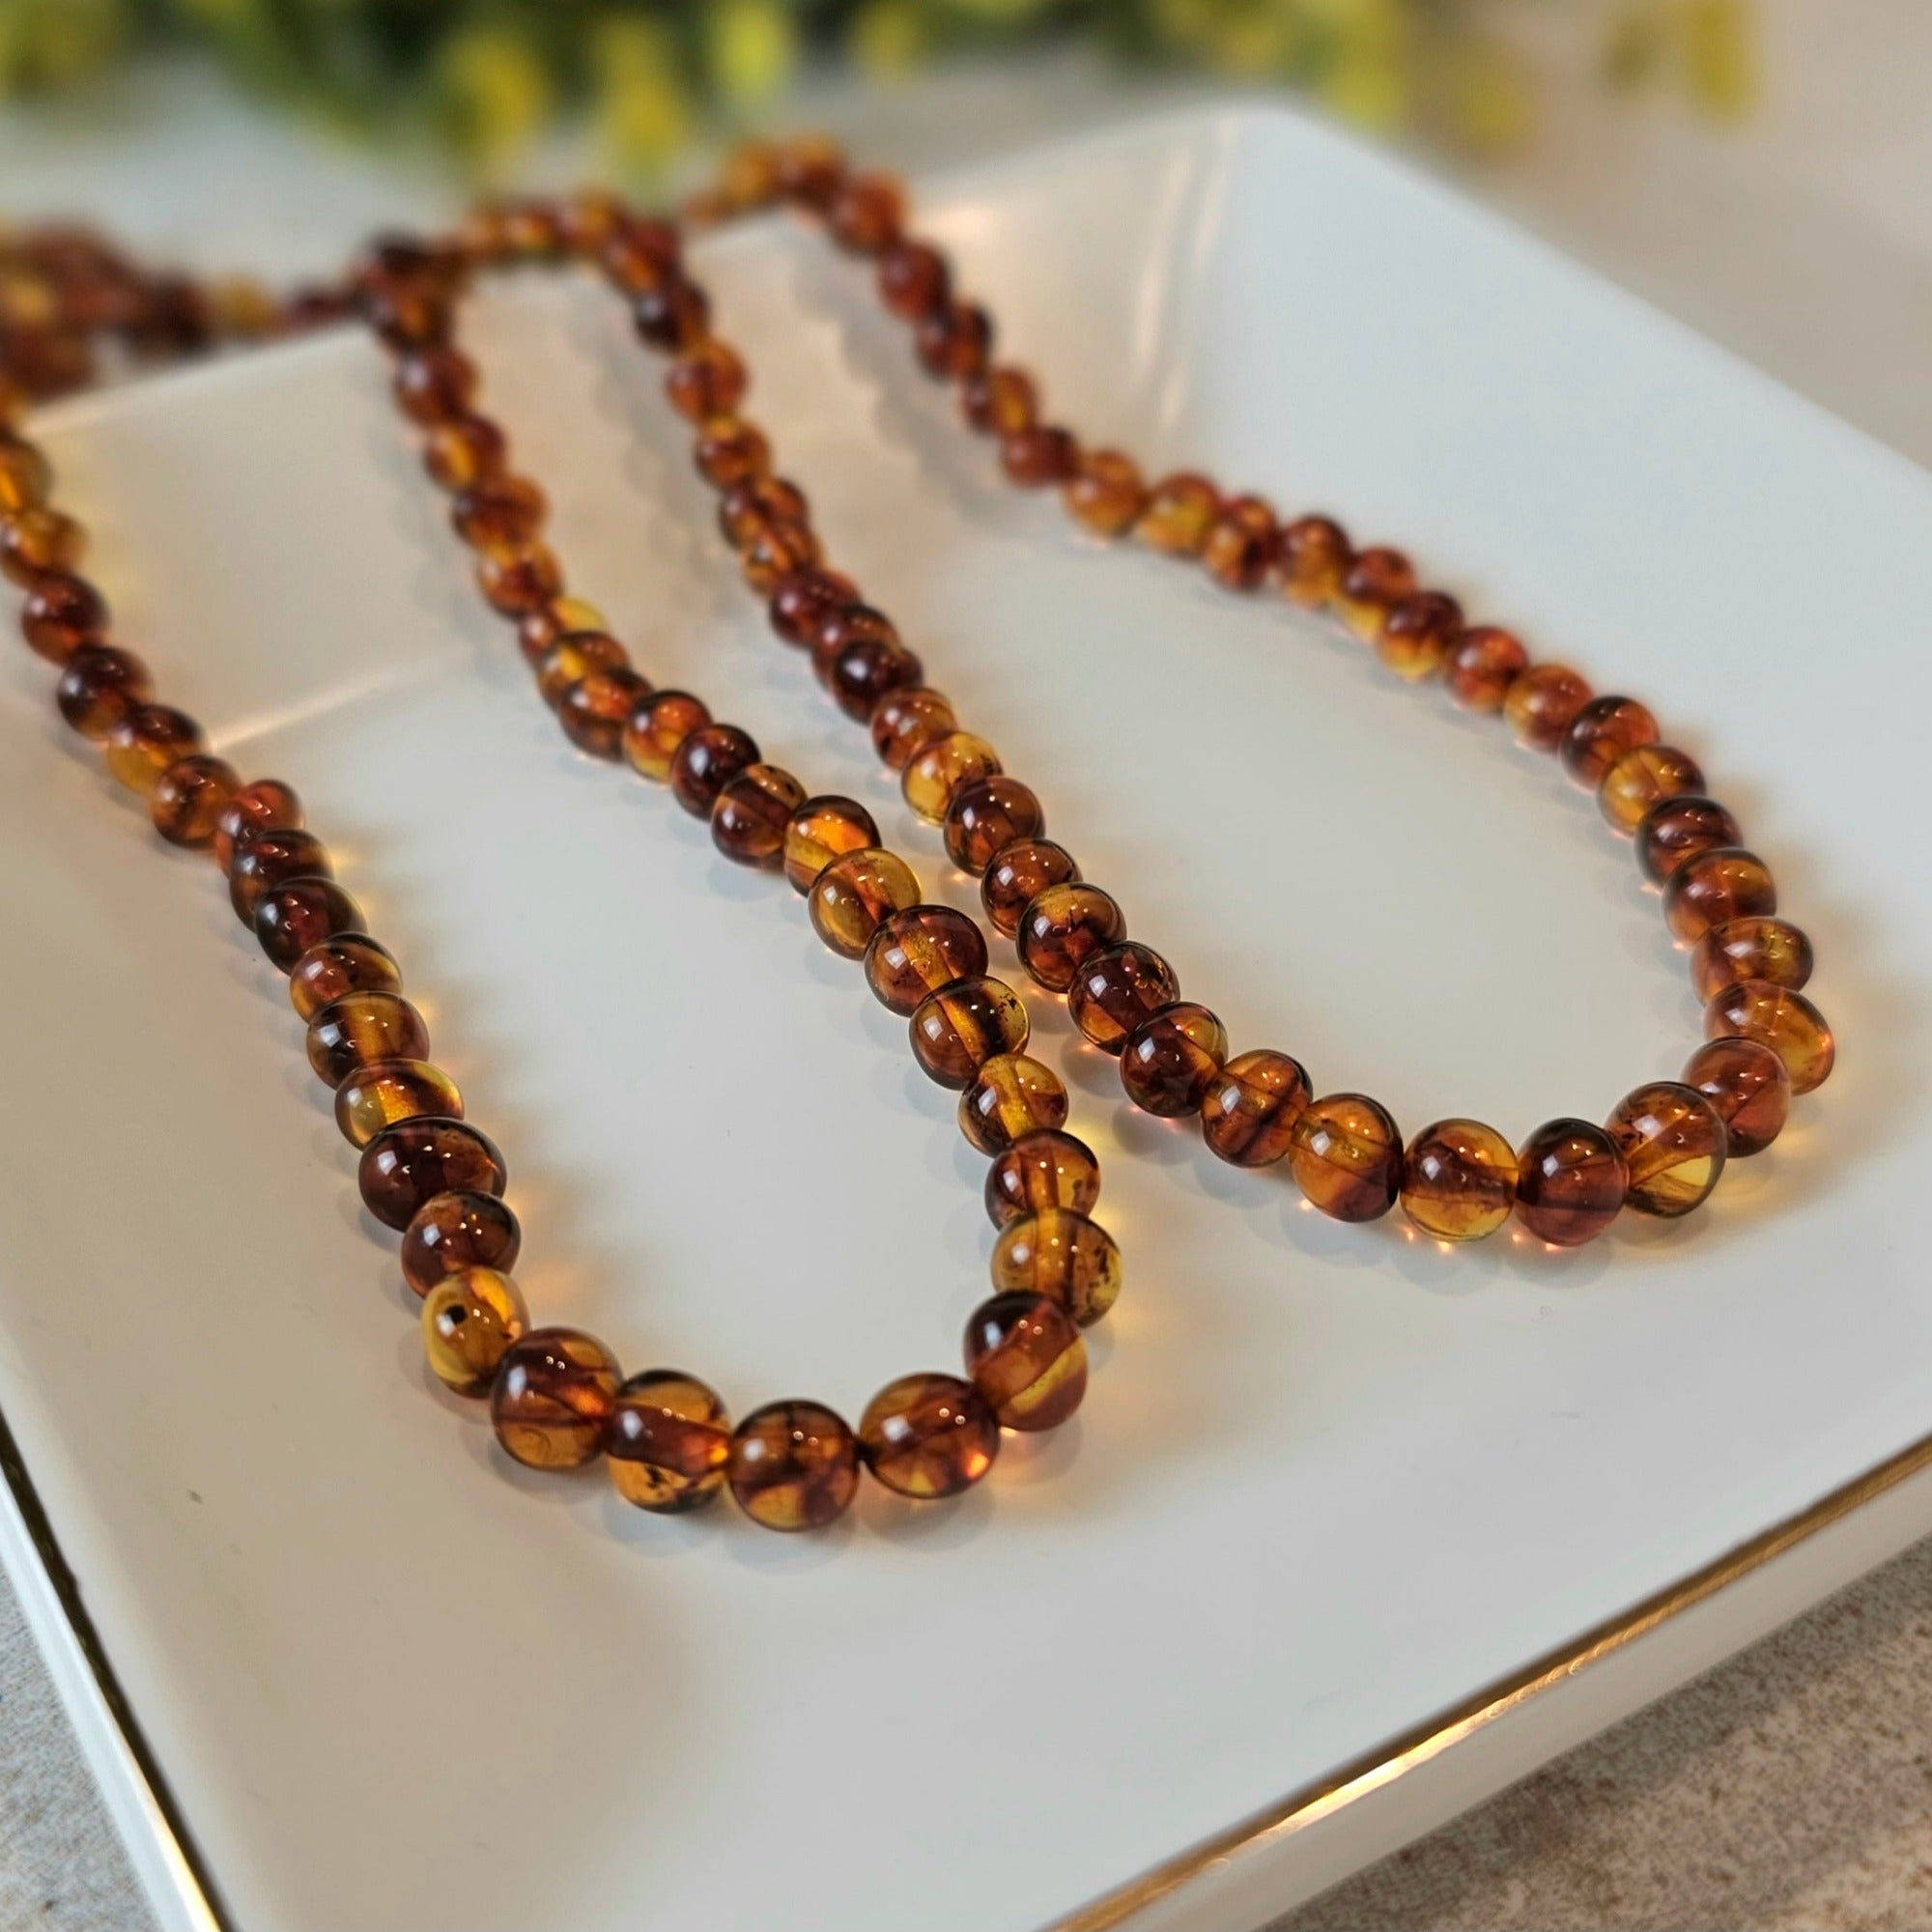 Large Amber Necklace Made of Large Free Form Shape Baltic Amber.